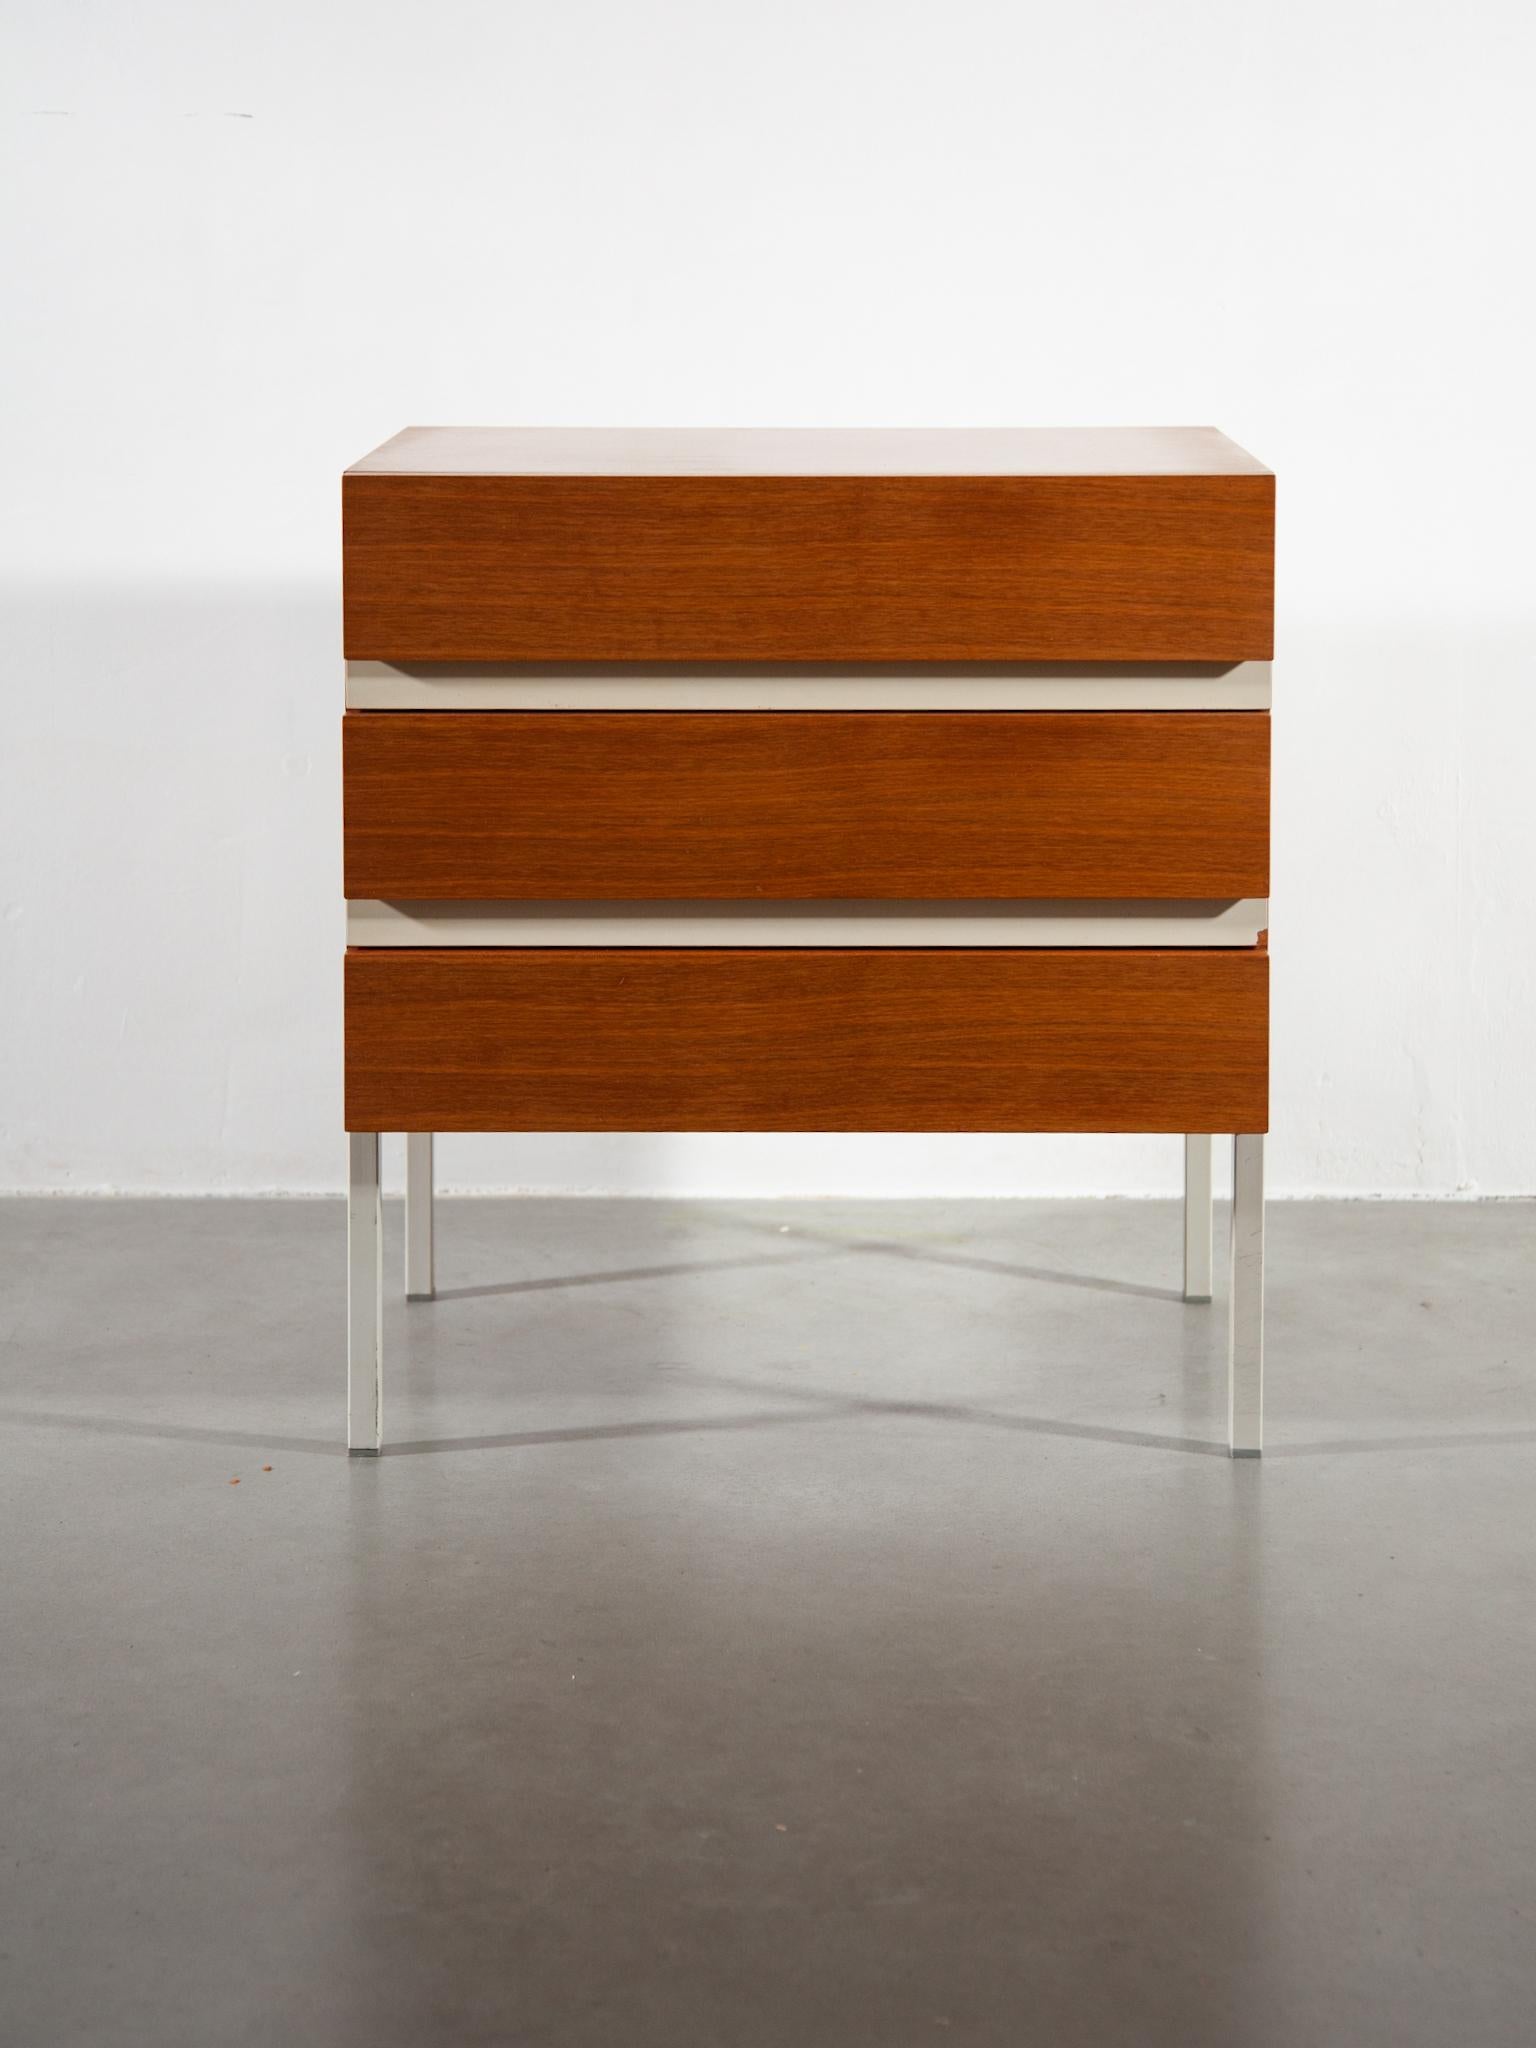 Side table in cherrywood and lacquered white laminate, three drawers, West German manufacture INTERLUBKE, 1970s. Perfect stability and in original perfect condition.
